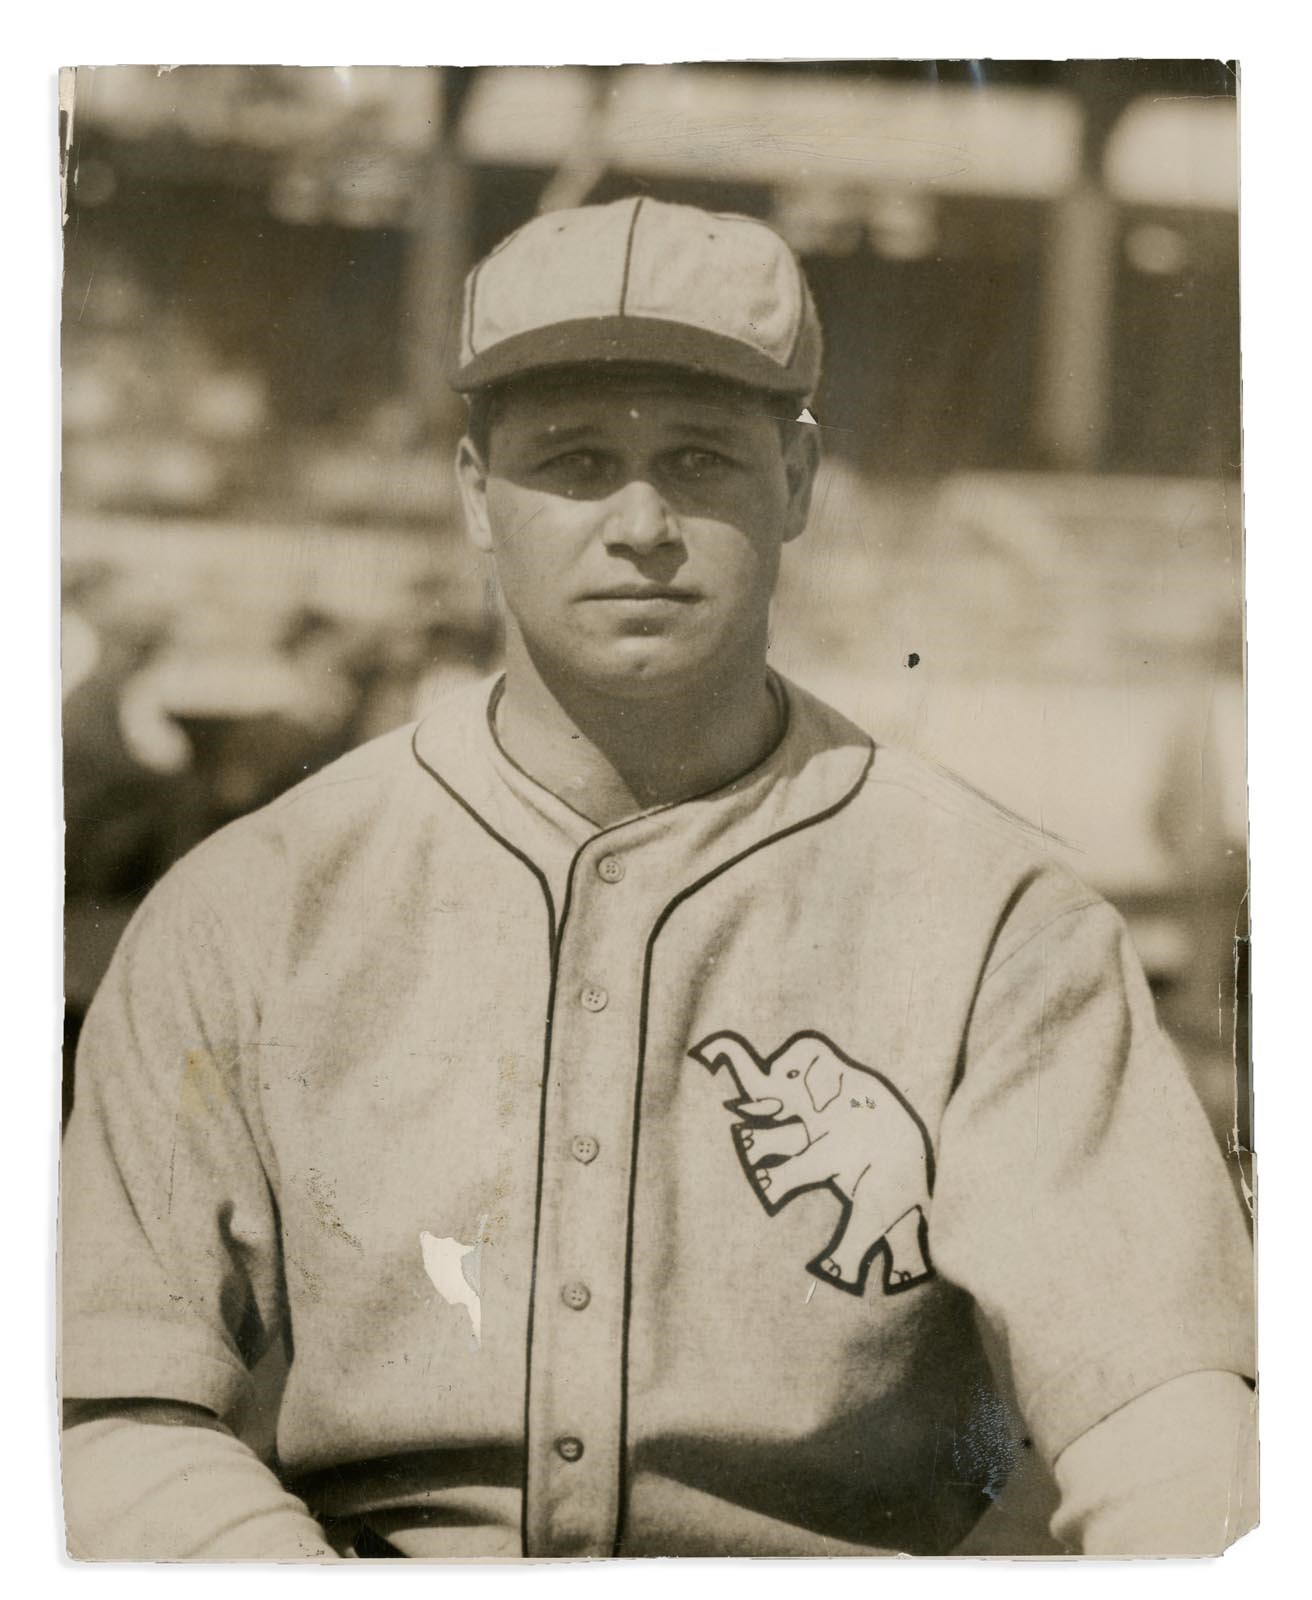 - 1926 "Up and Coming" Jimmie Foxx (Rookie Season) By Charles Conlon